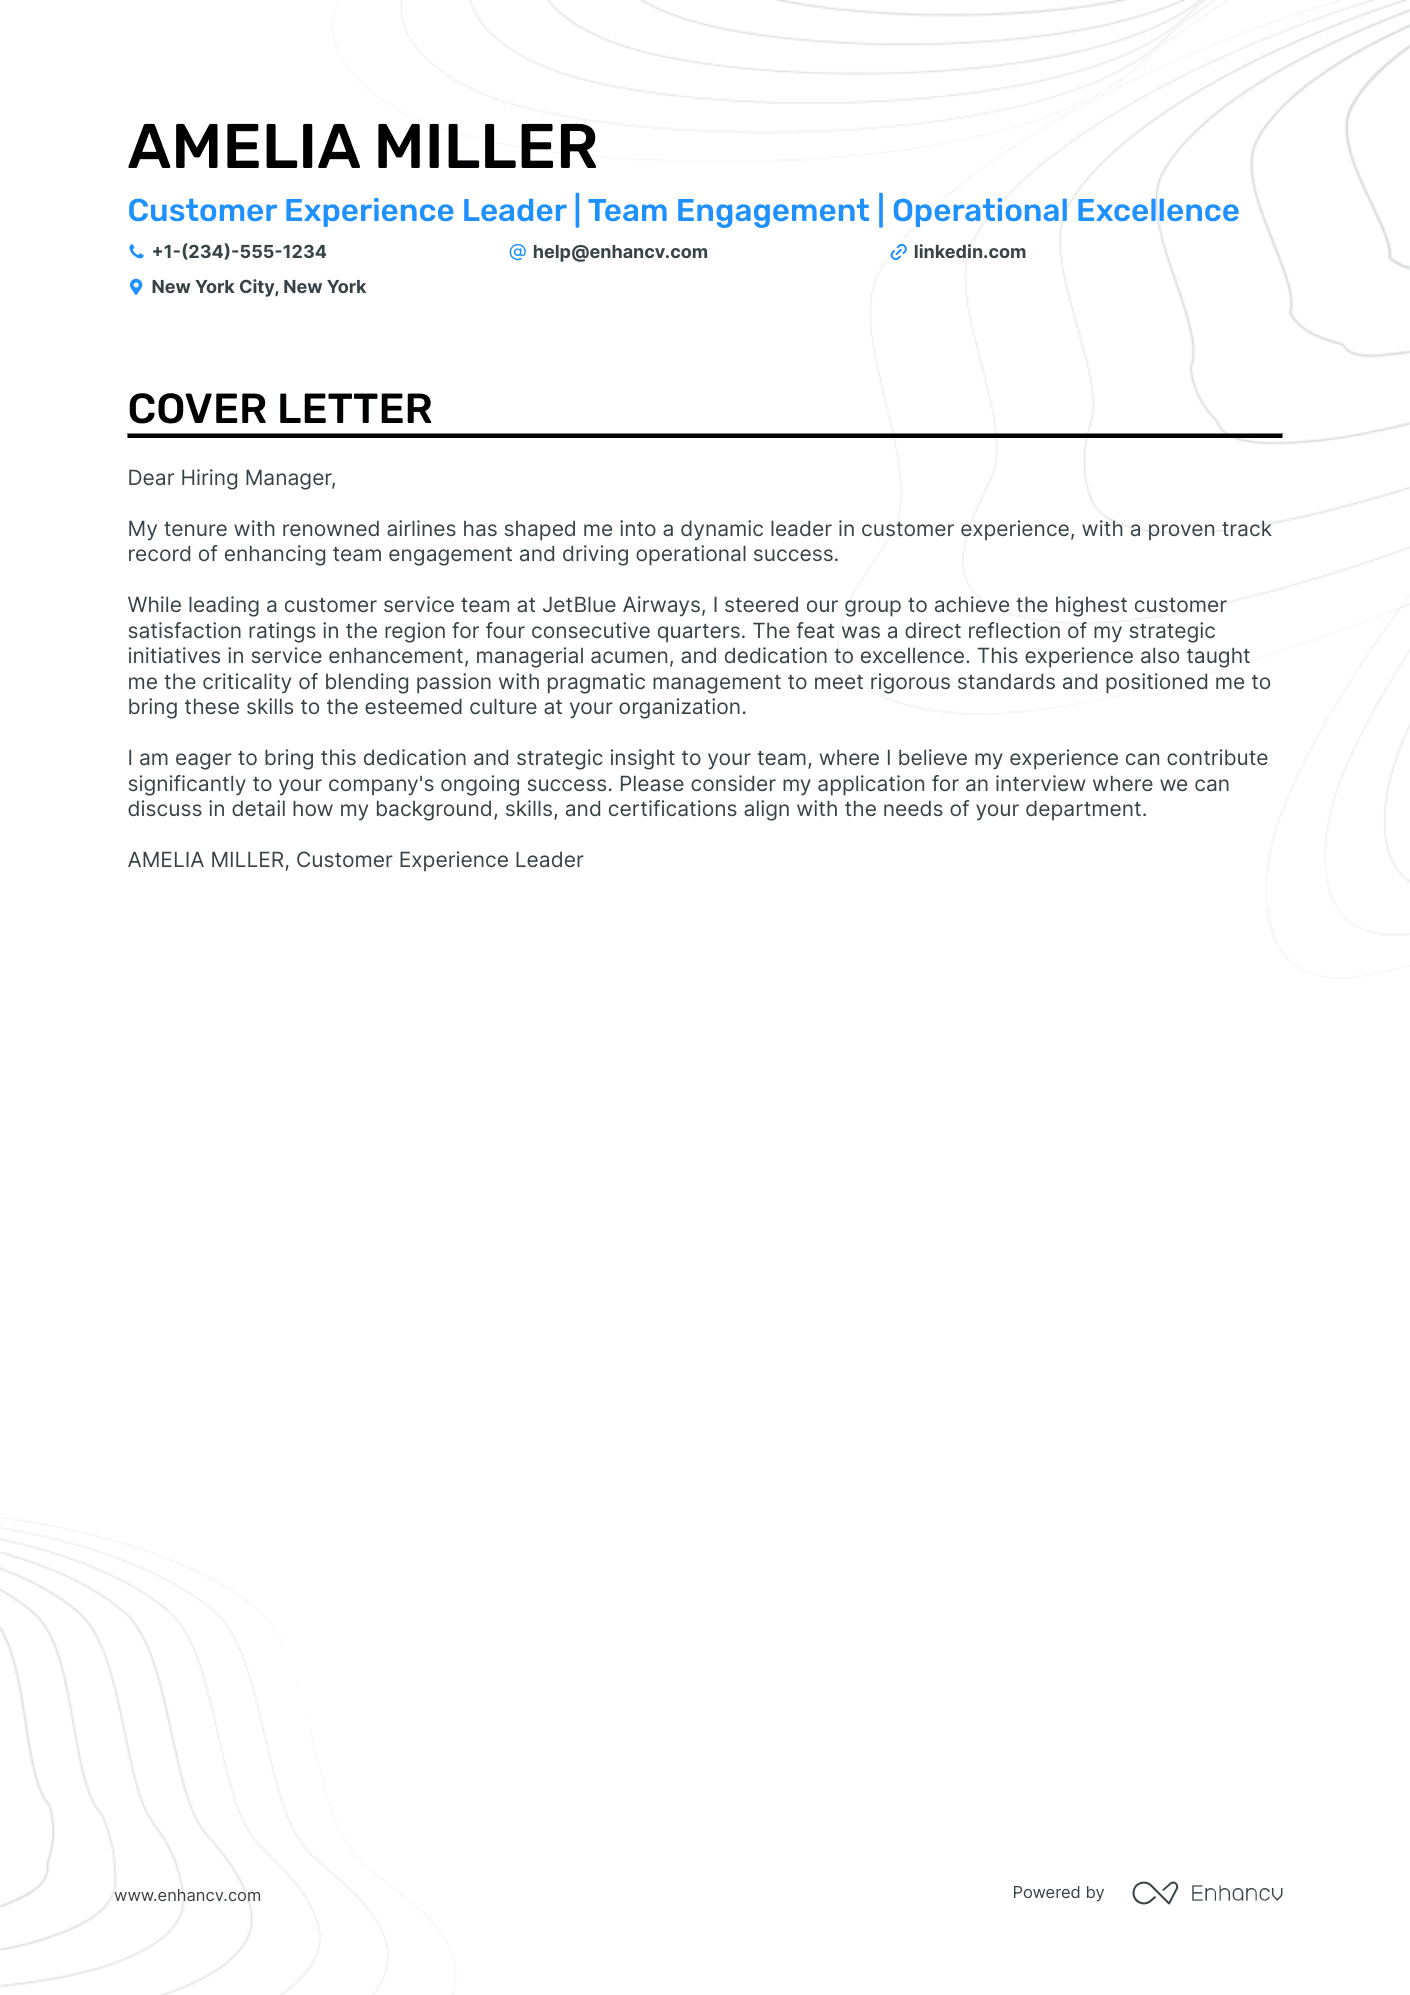 Customer Service Manager cover letter